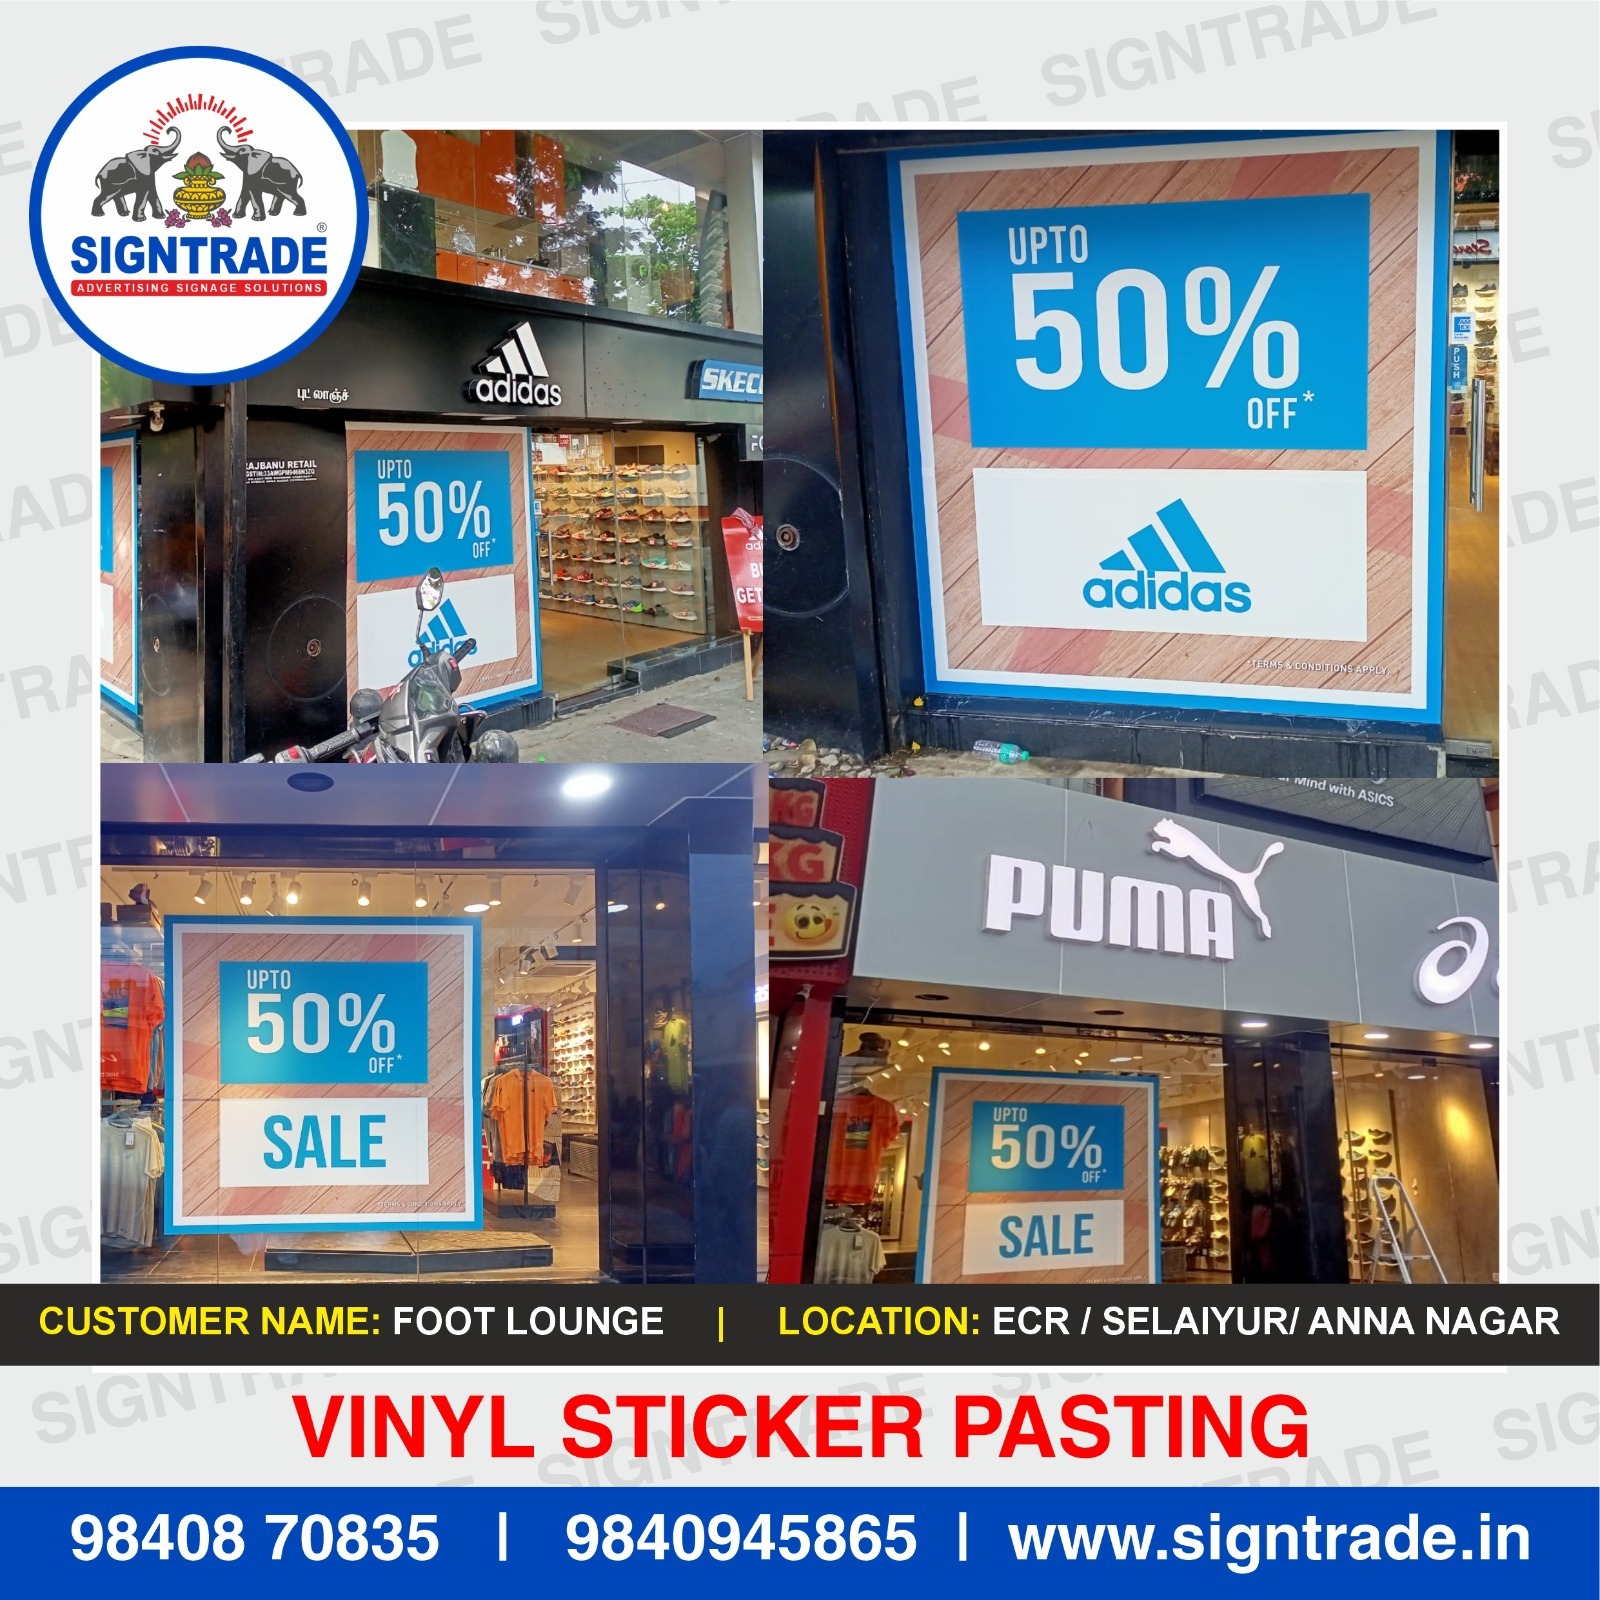 Vinyl Stickers Pasting Services near me